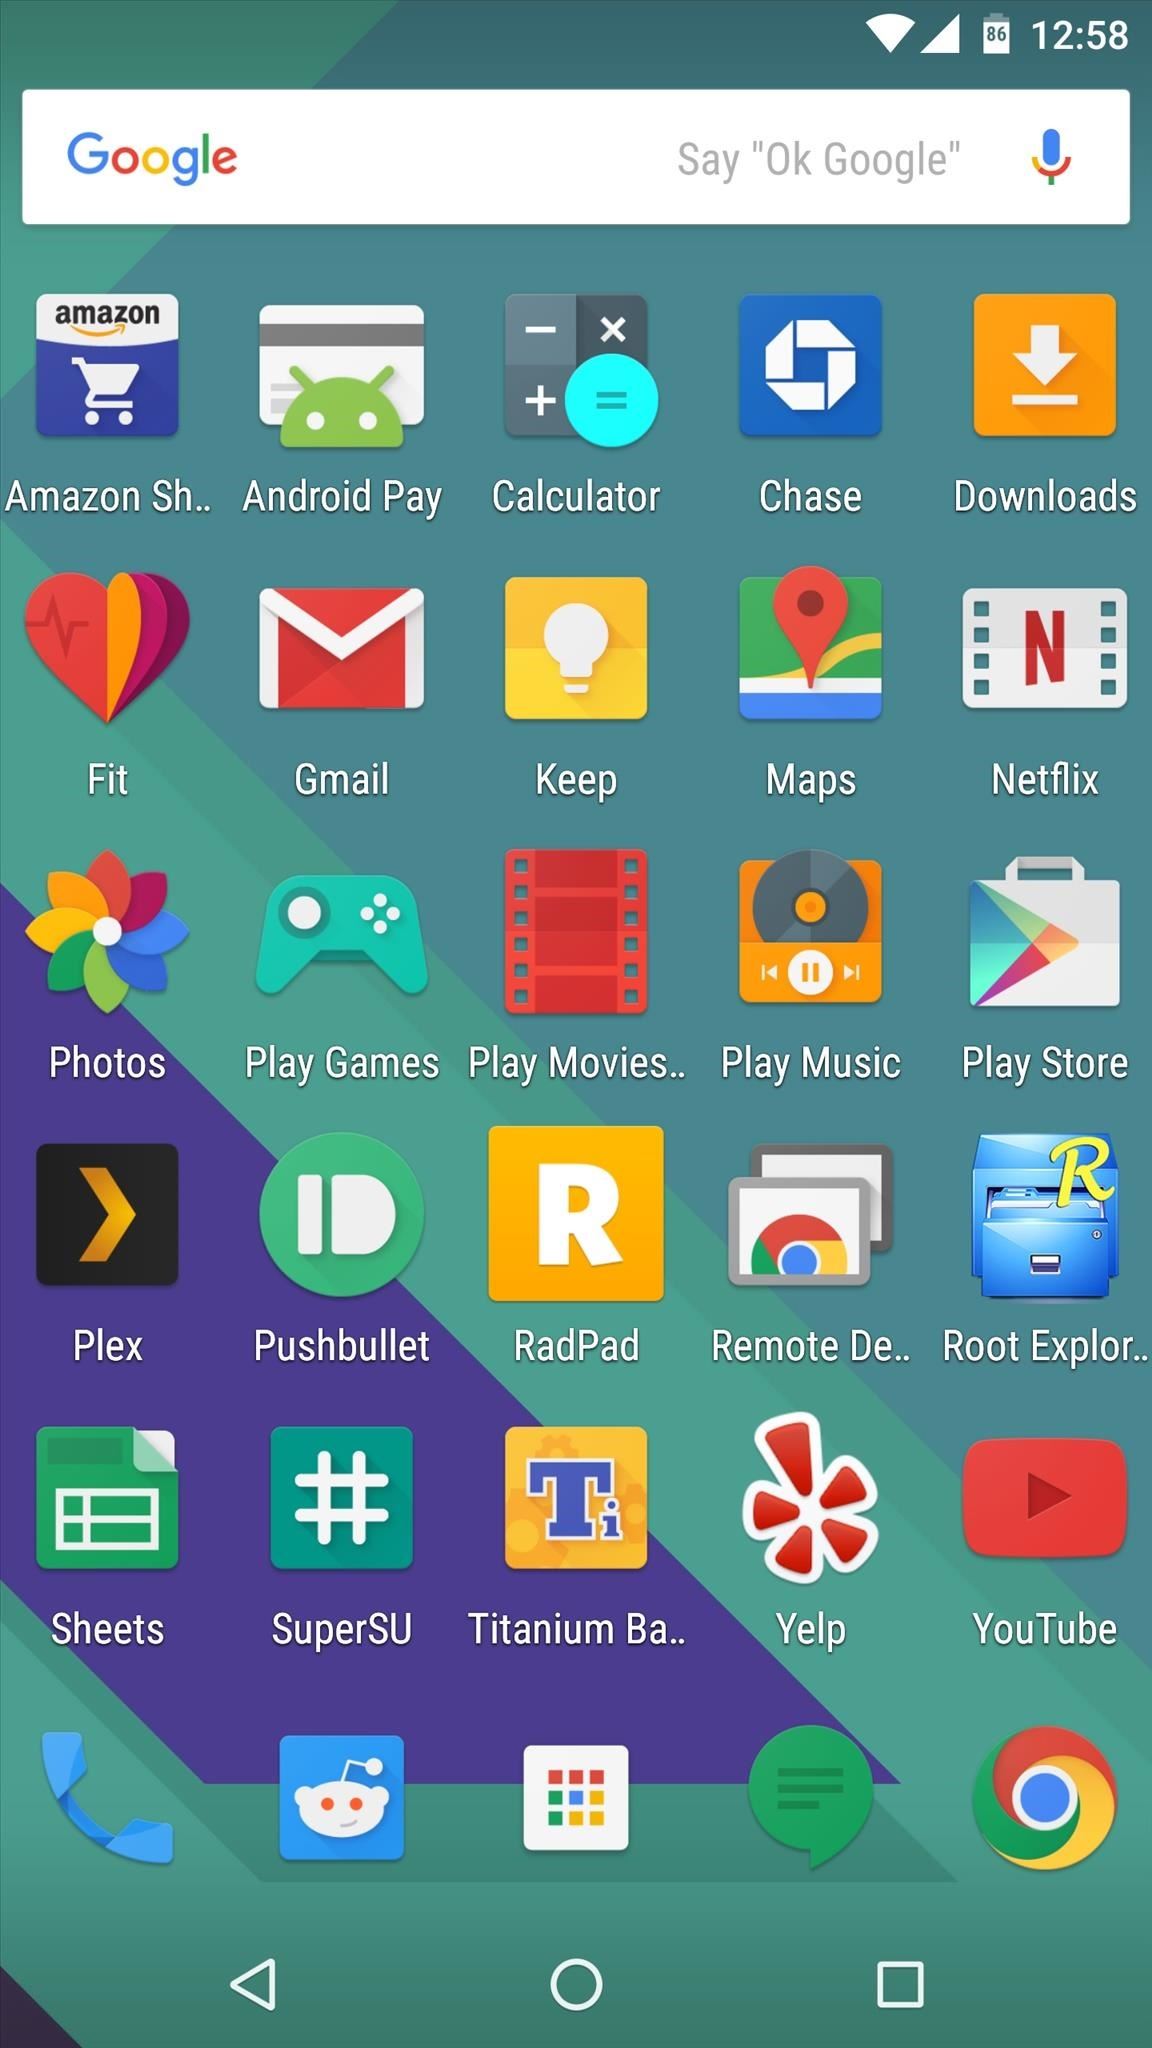 10 Free Icon Packs That'll Change the Look & Feel of Your Android